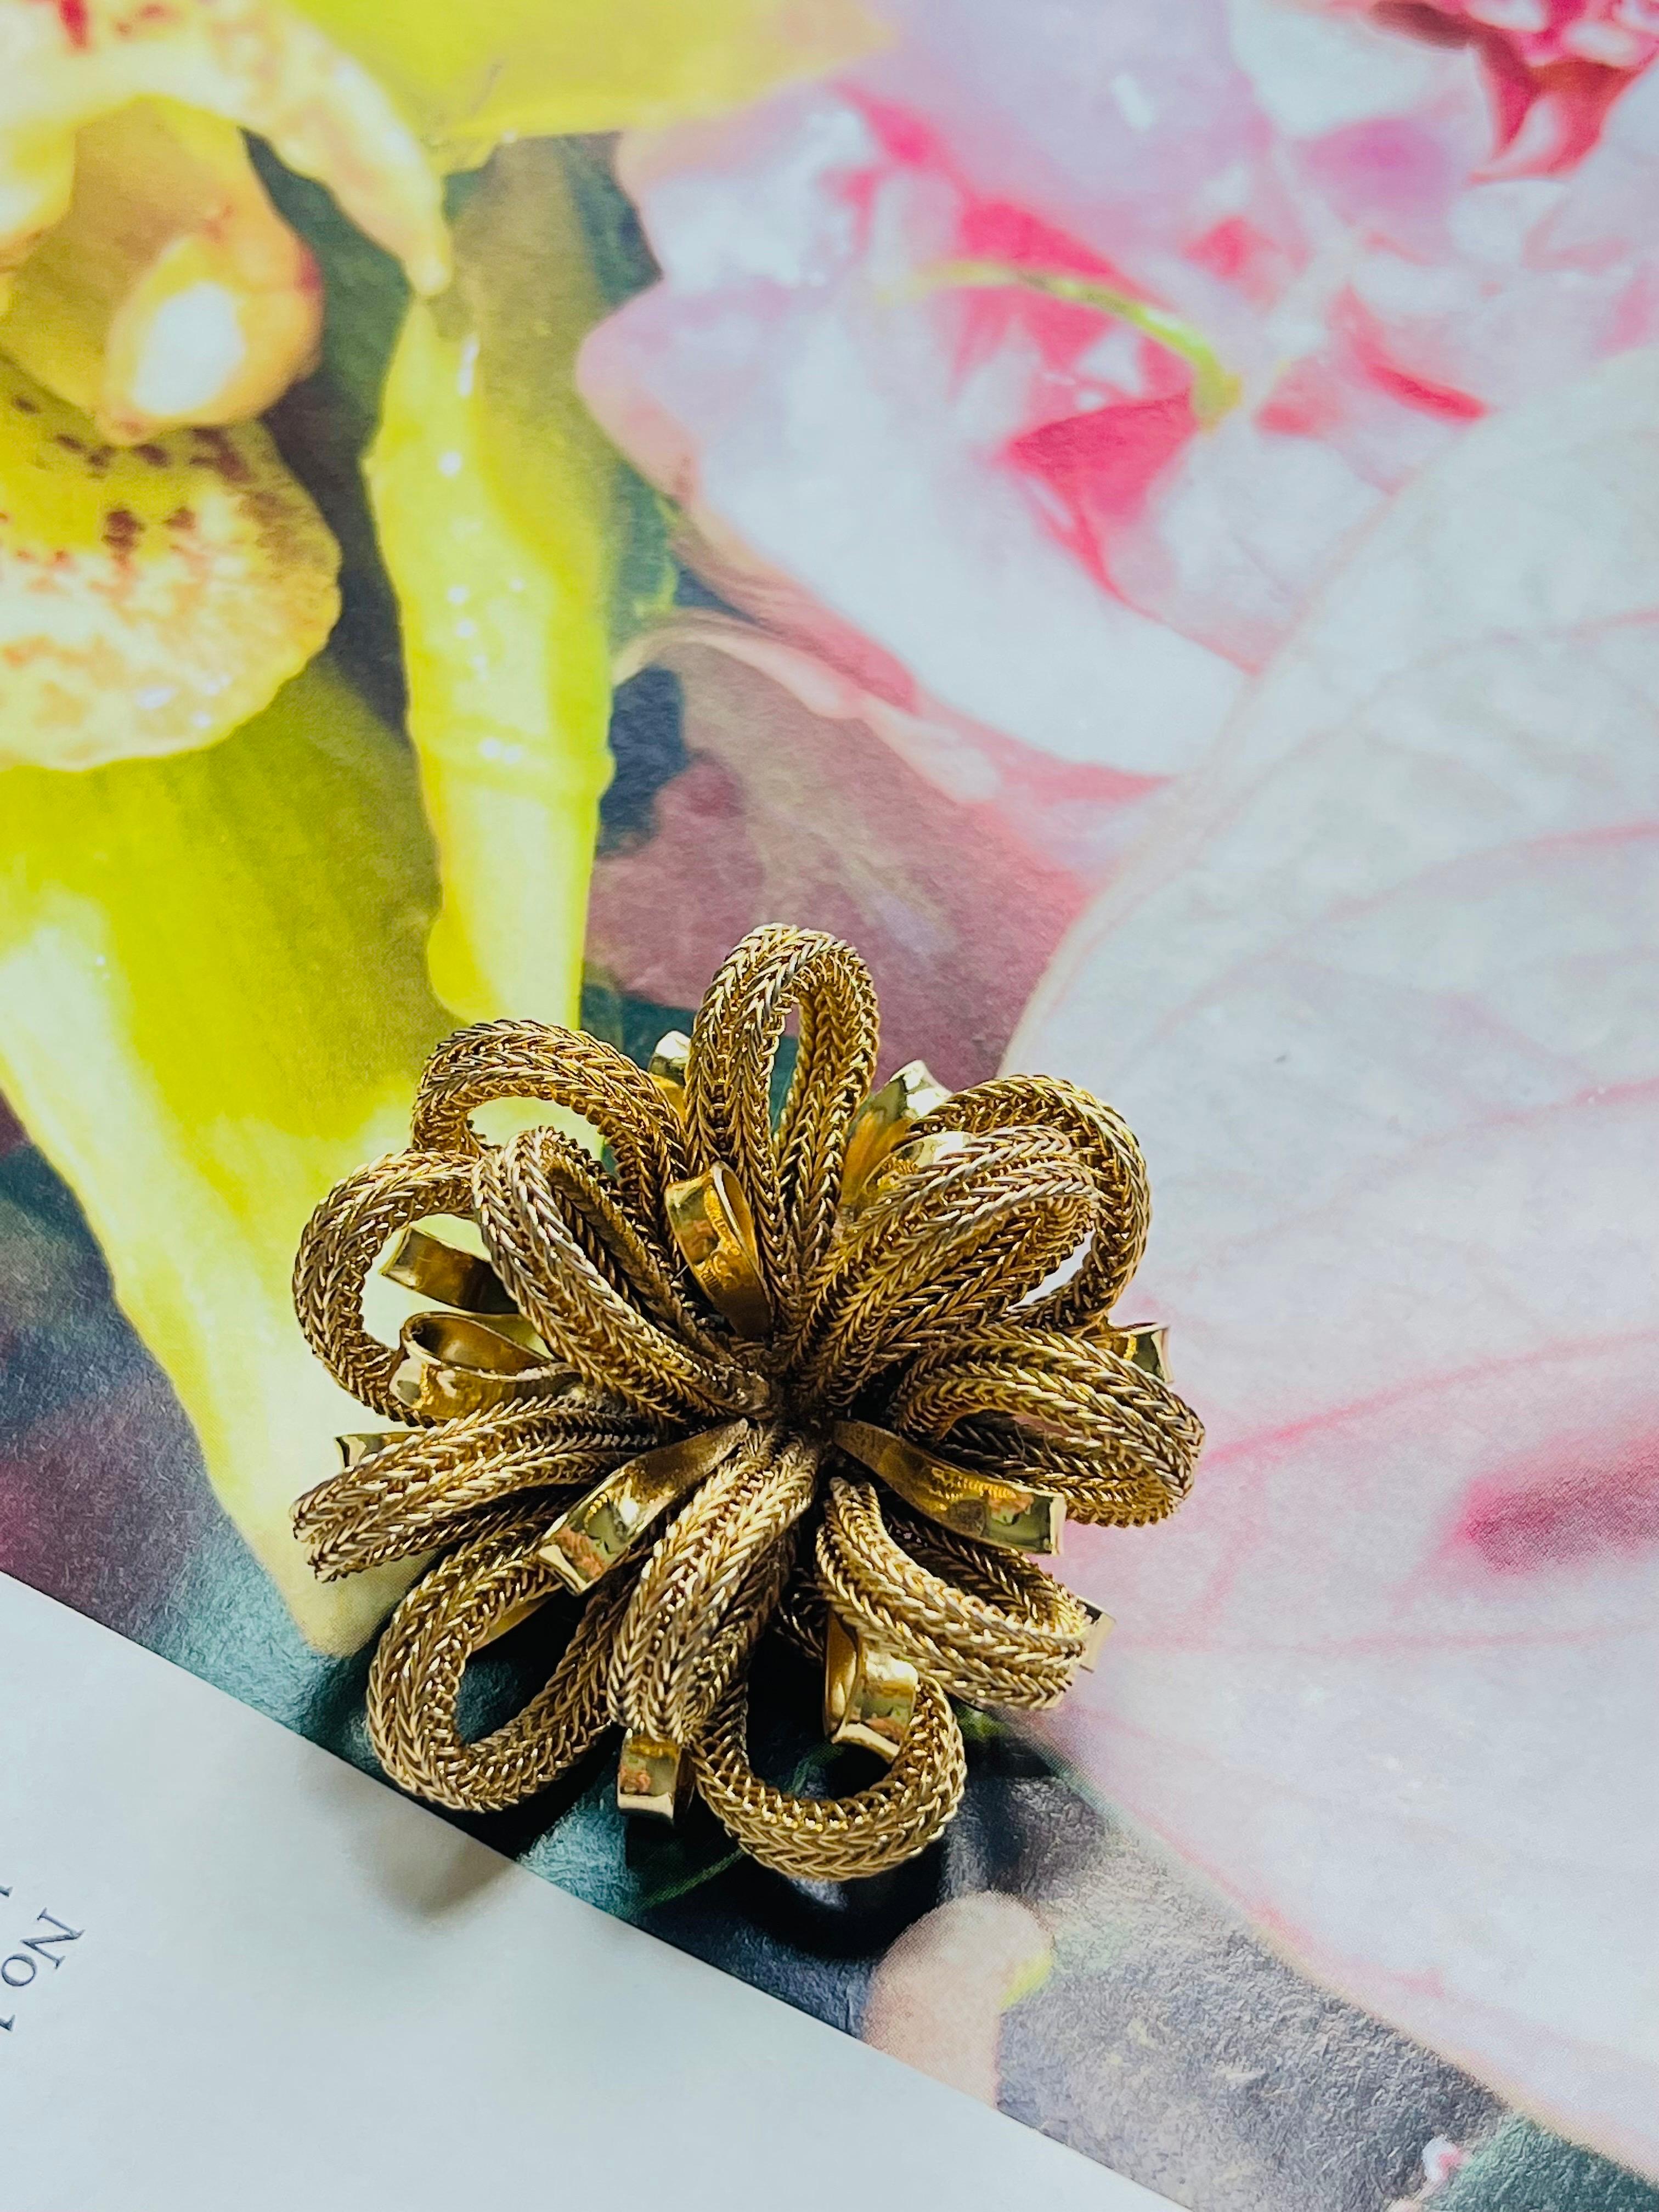 Christian Dior Vintage 1967 Vivid Mesh Knit Ribbon Bow Flourish Flower Brooch In Excellent Condition For Sale In Wokingham, England